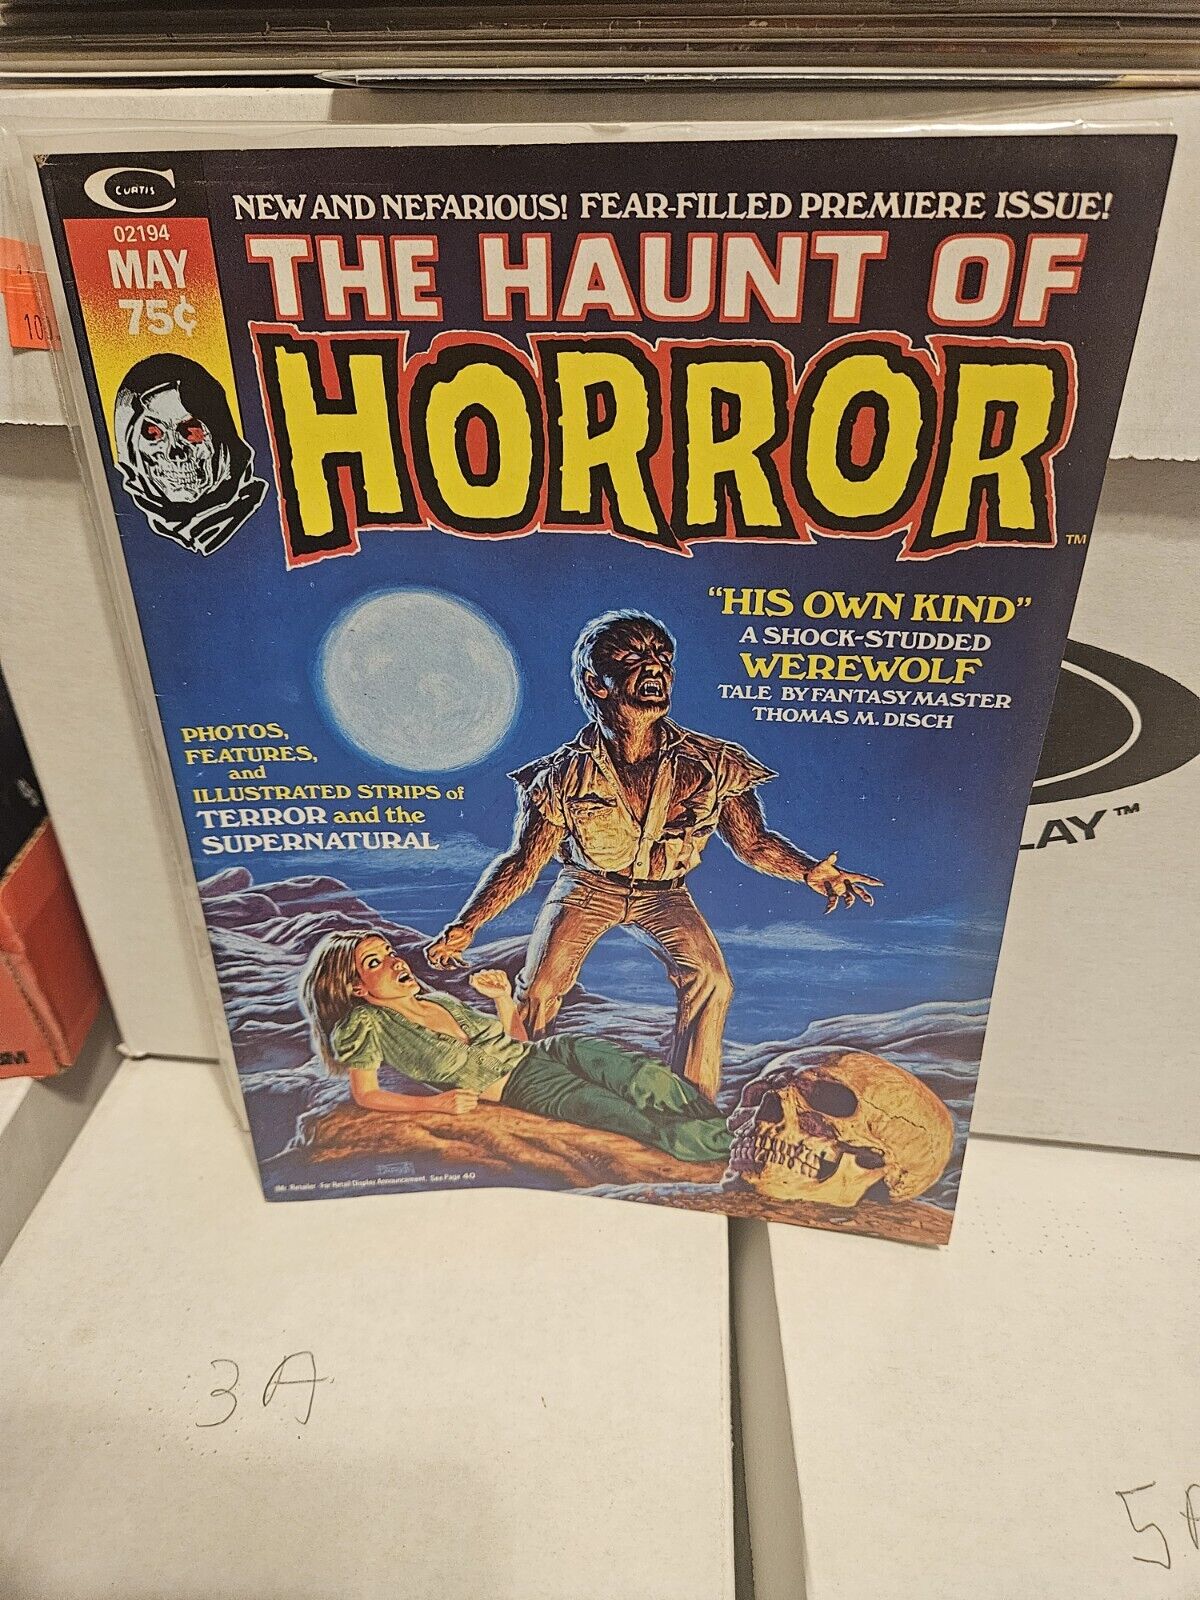 The Haunt of Horror Comic book 1974 Stan Lee V1 No. 1 May 1974